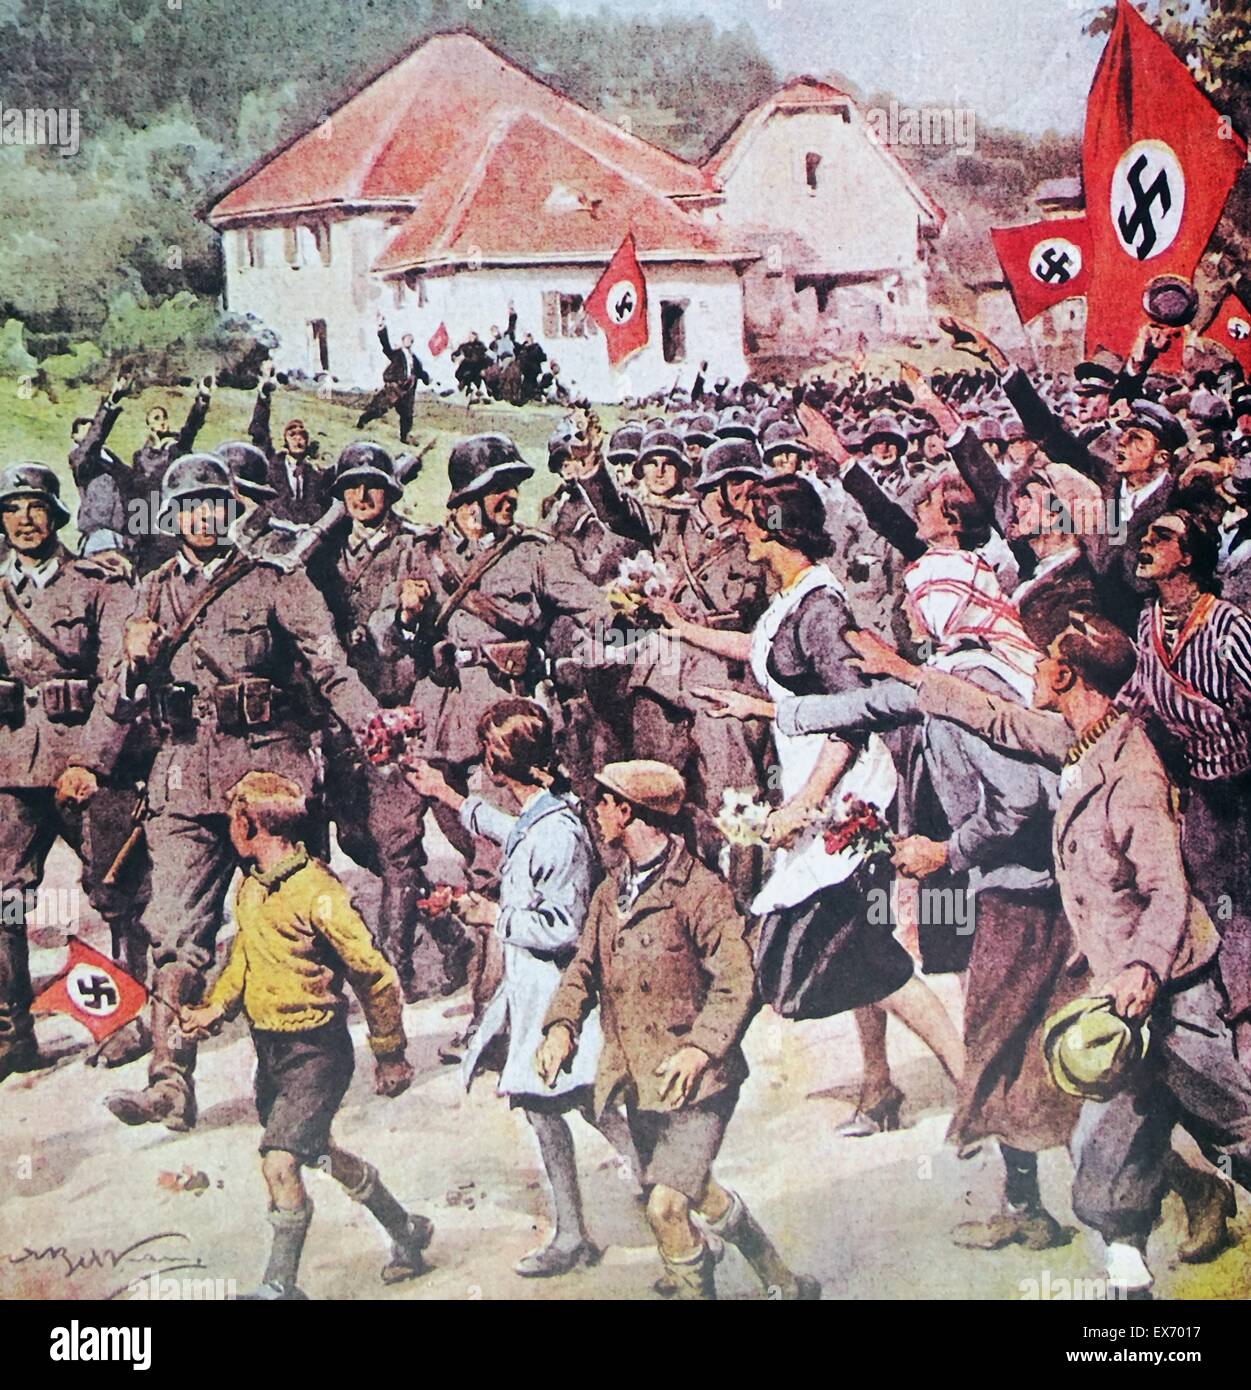 German soldiers enter the Sudeten land in 1938. The Sudeten crisis of 1938 was provoked by the demands of Nazi Germany that the Sudetenland be annexed to Germany, which in fact took place after the later infamous Munich Agreement Stock Photo